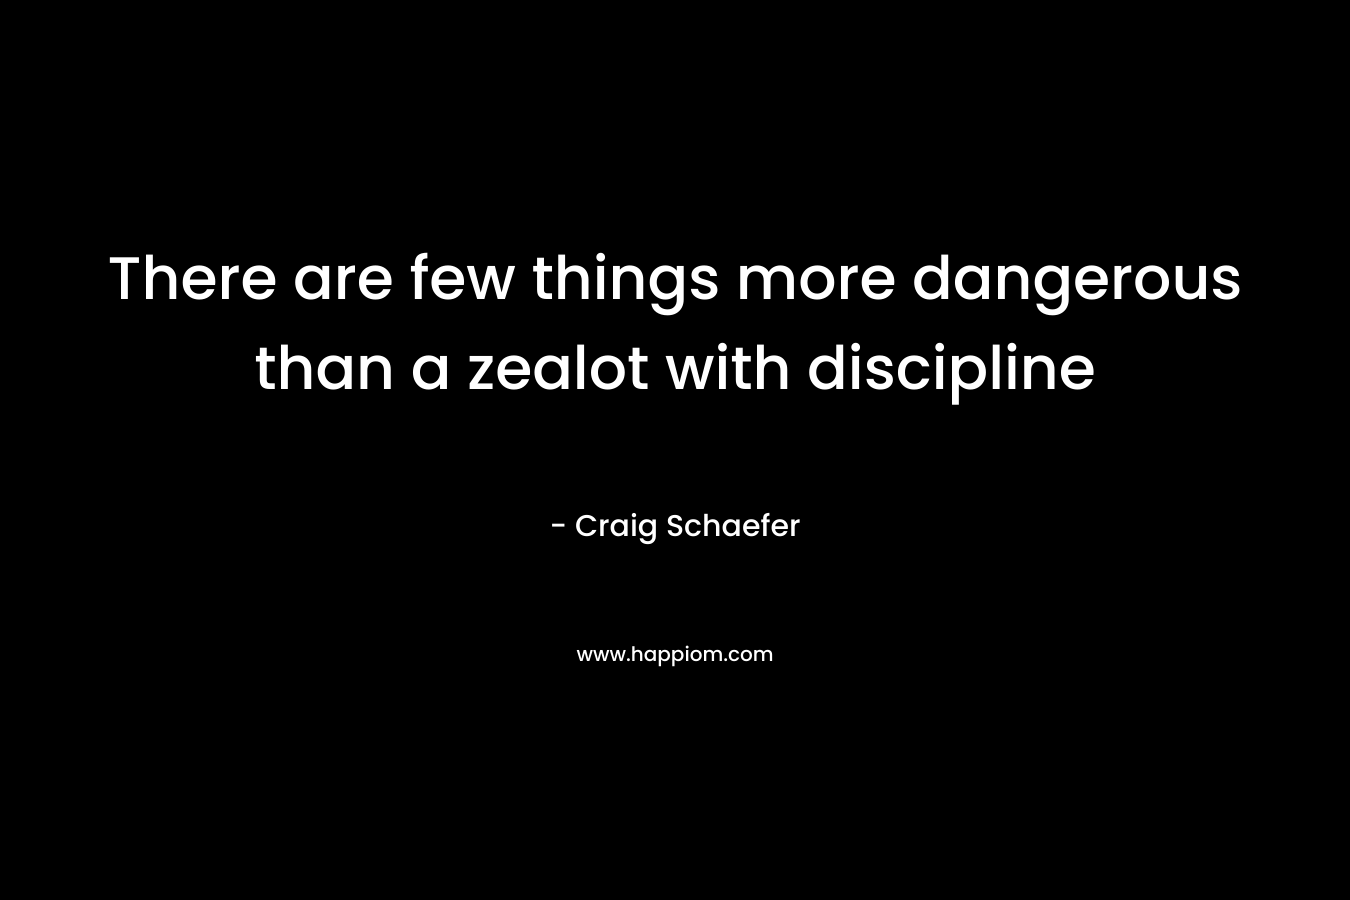 There are few things more dangerous than a zealot with discipline